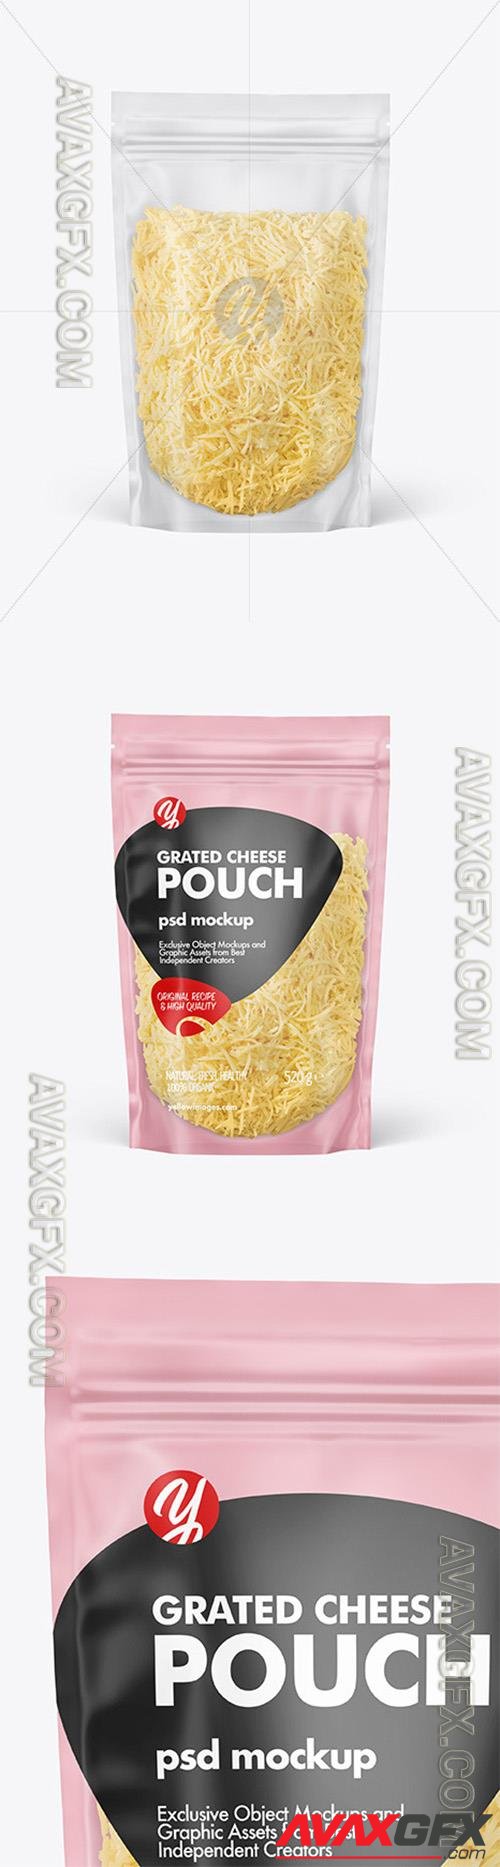 Frosted Plastic Pouch w/ Grated Cheese Mockup 89220 TIF